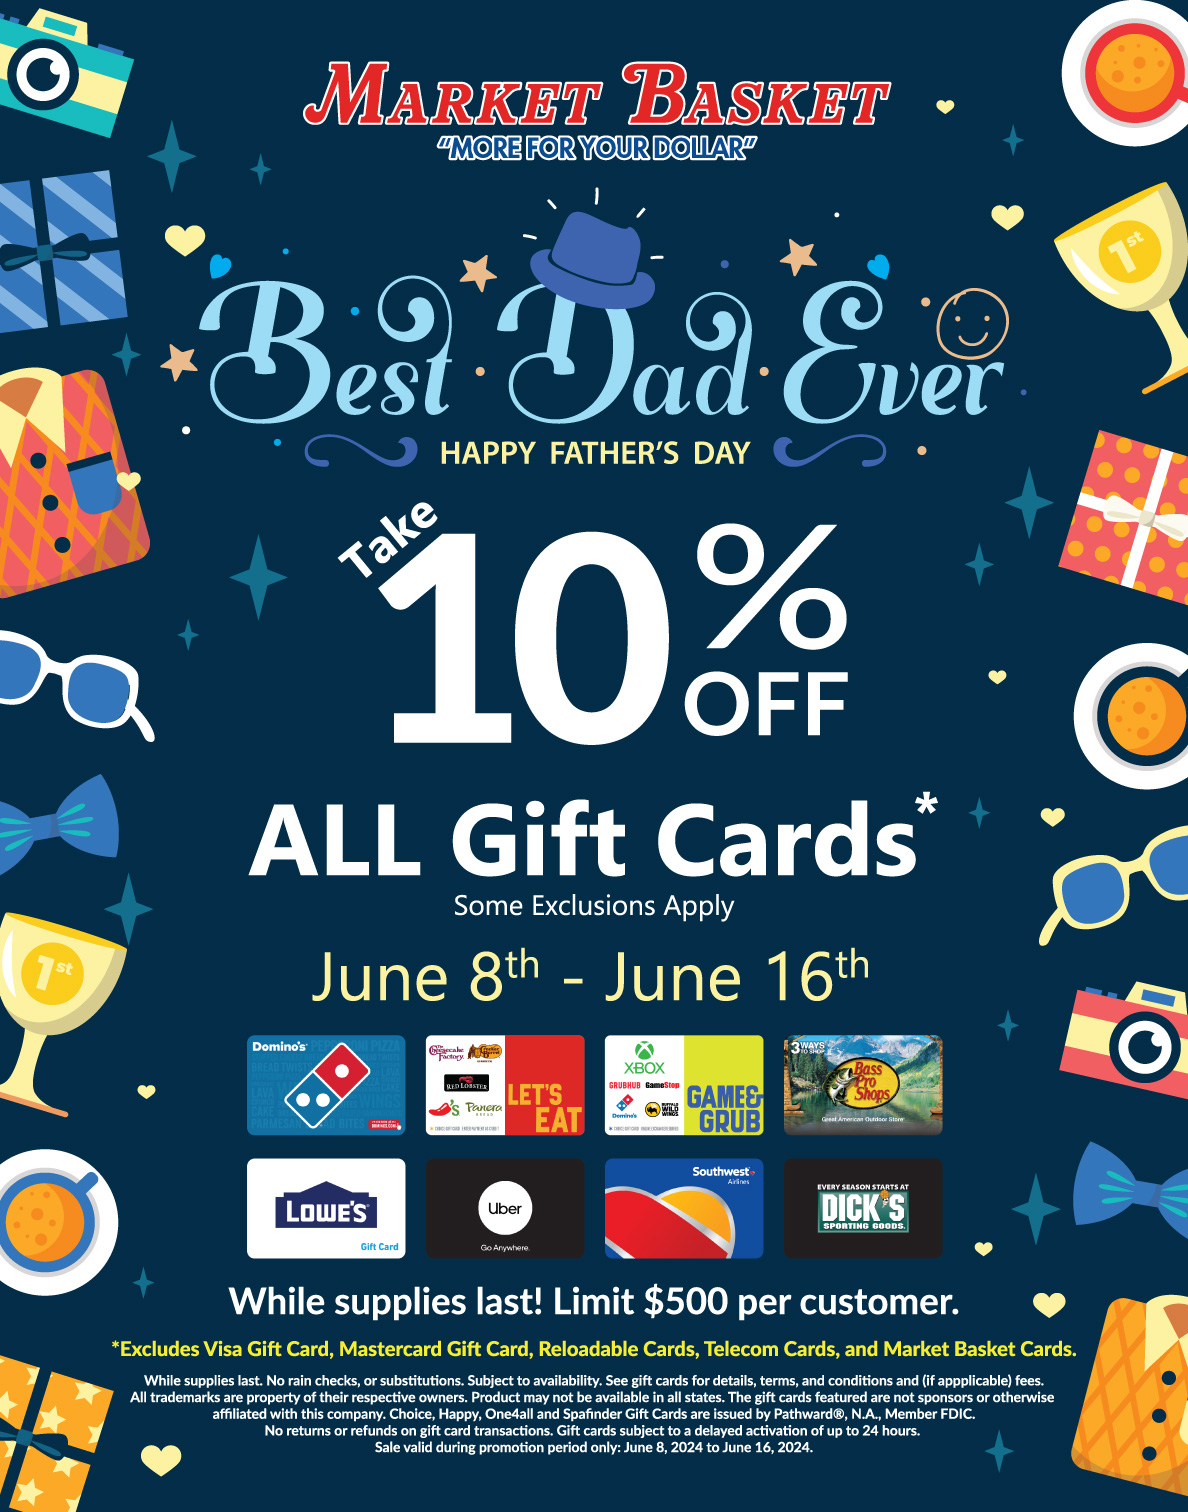 Take 10 percent off all gift cards, some exclusions apply!